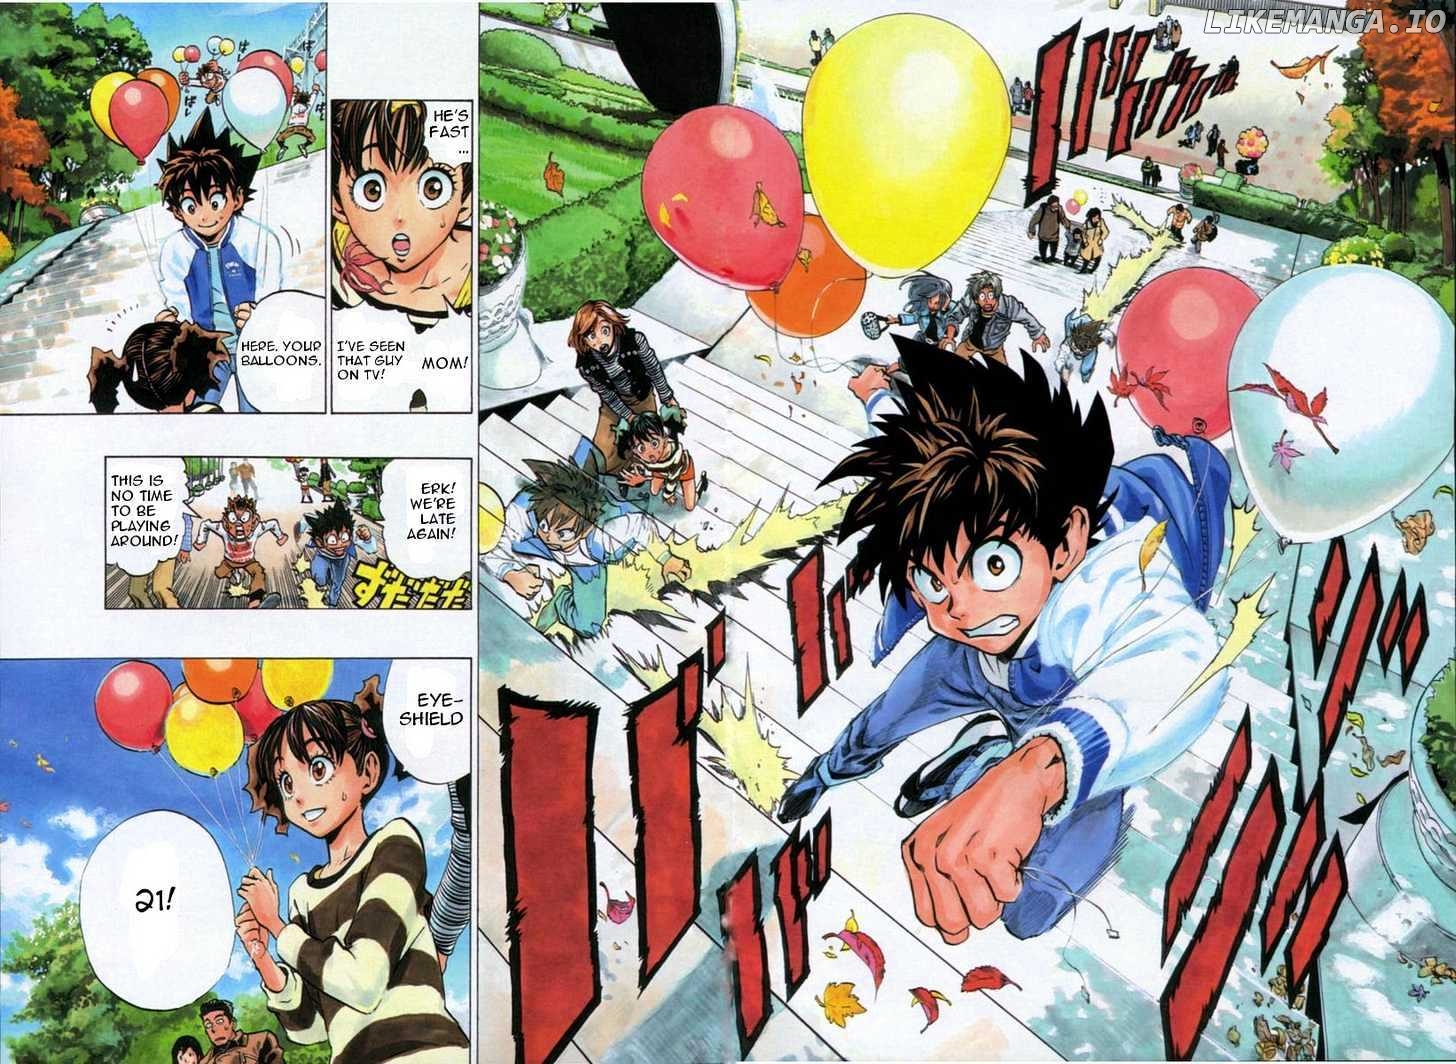 Eyeshield 21 chapter 168-169 - page 2